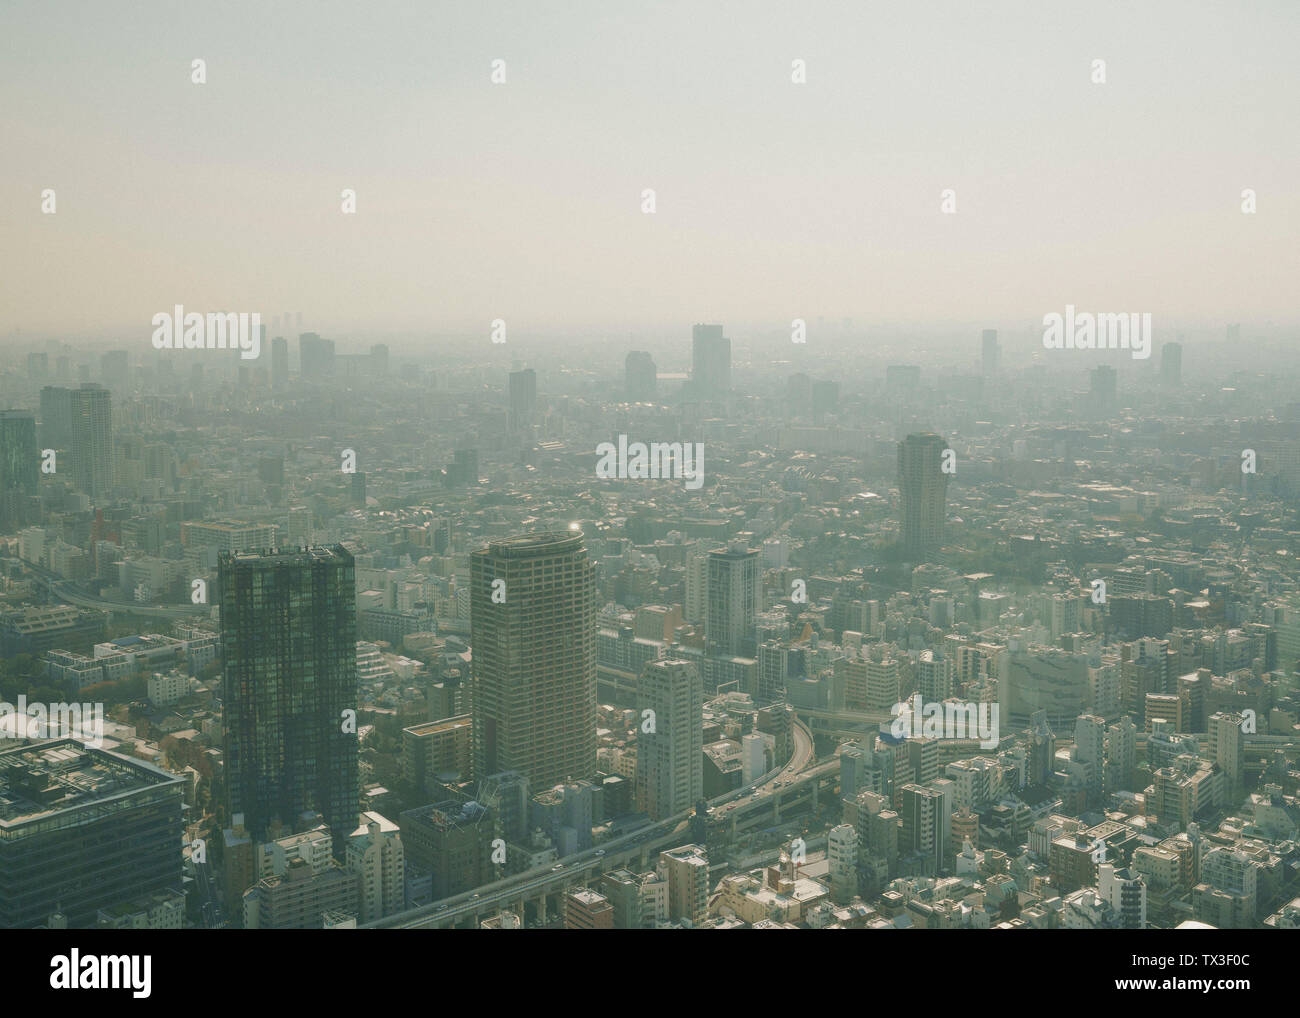 Sunny, smoggy cityscape view, Tokyo, Japan Stock Photo